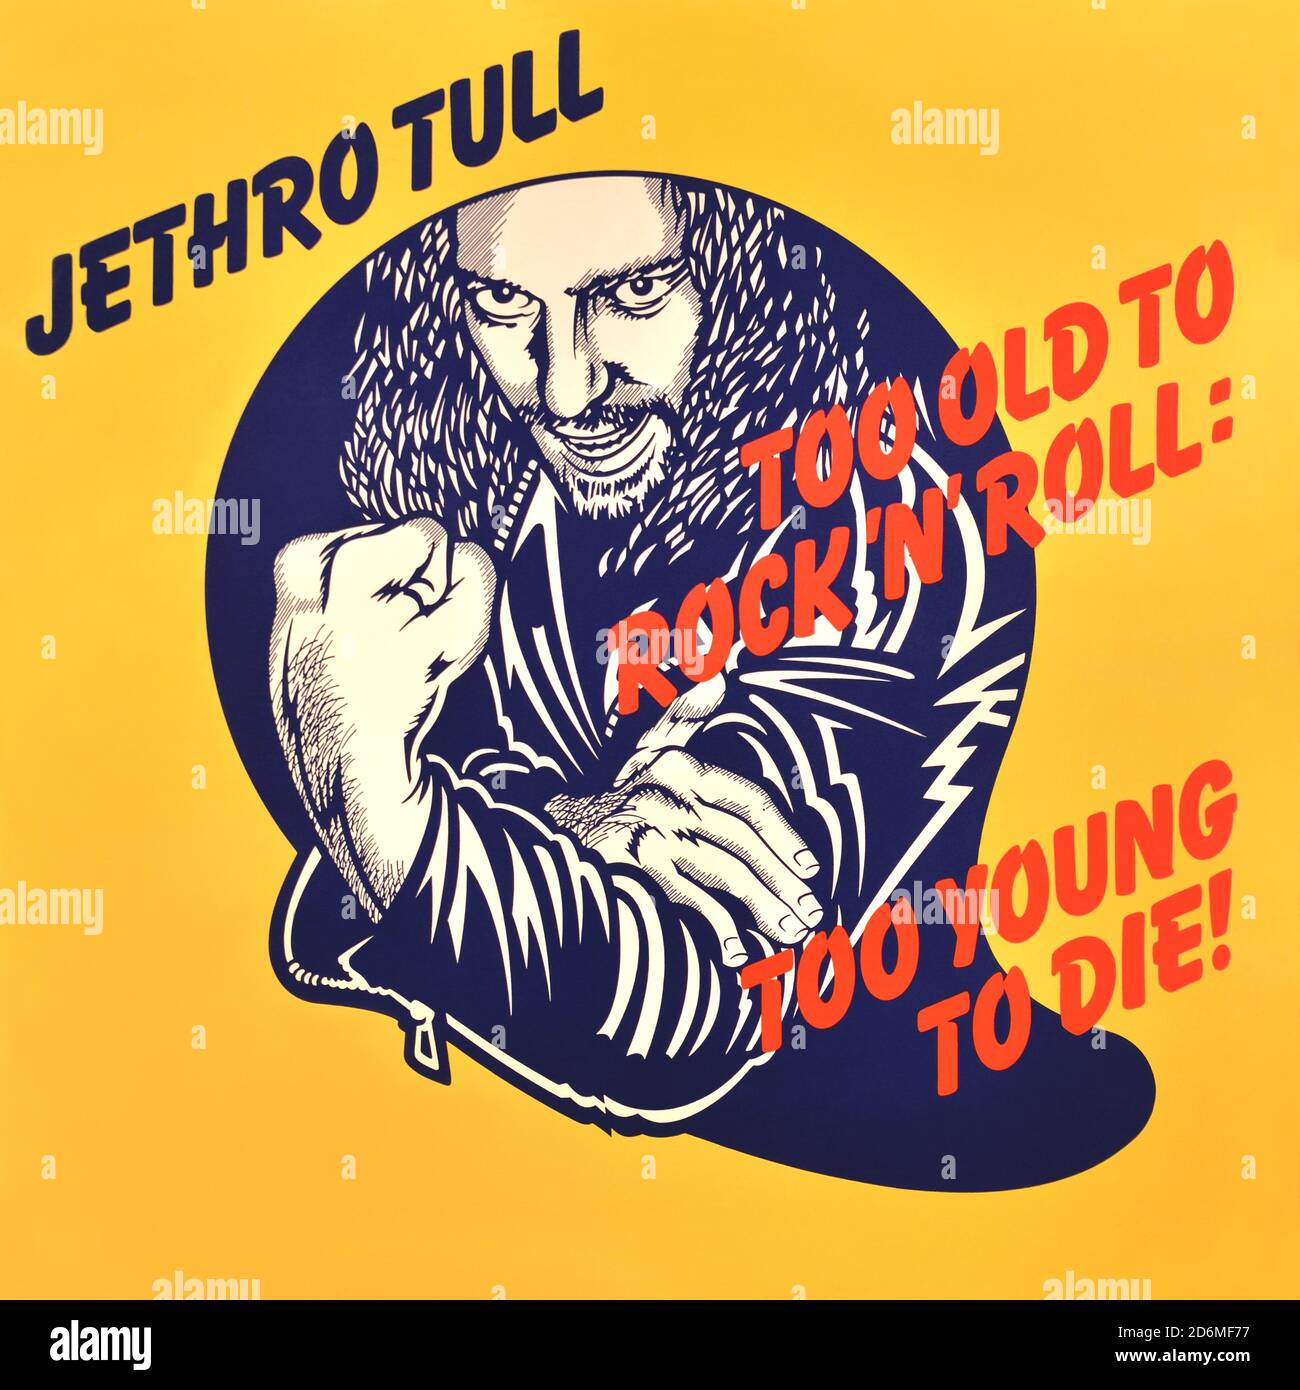 Jethro Tull - copertina originale dell'album in vinile - Too Old to Rock N' Roll: Too Young to Die - 1976 Foto Stock